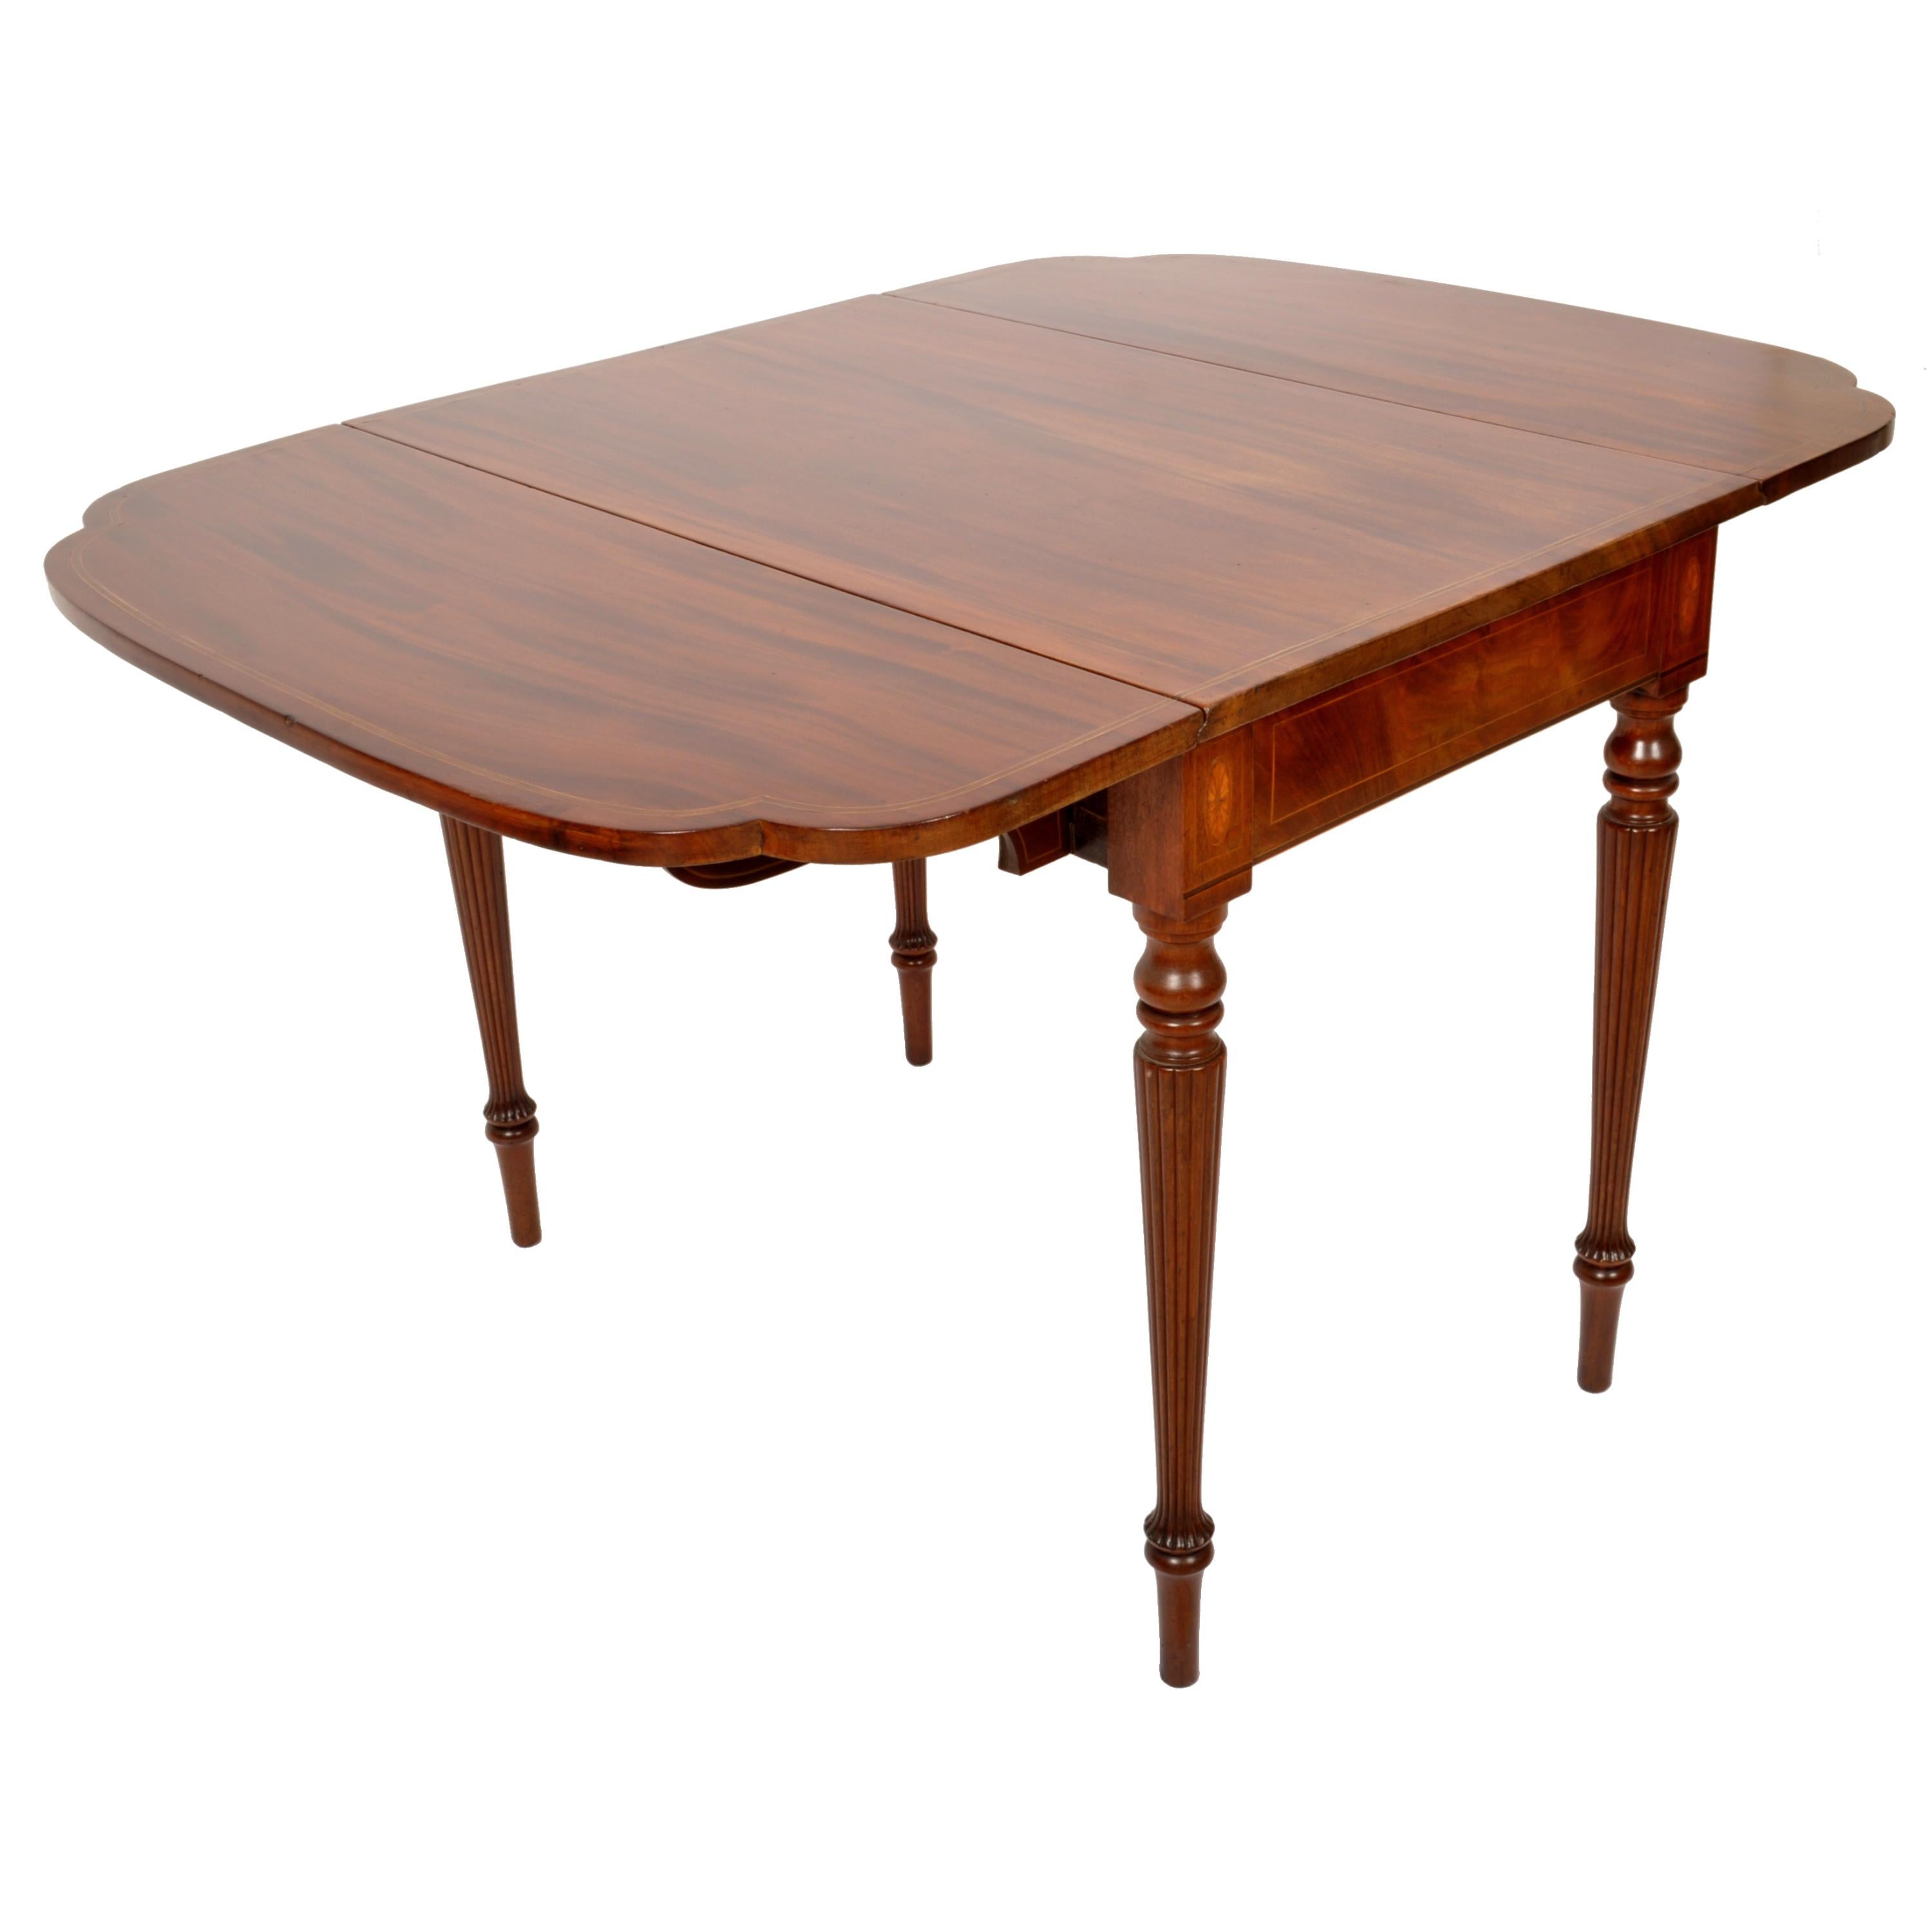 Antique American Federal Sheraton Inlaid Mahogany Pembroke Table New York 1790 For Sale 6